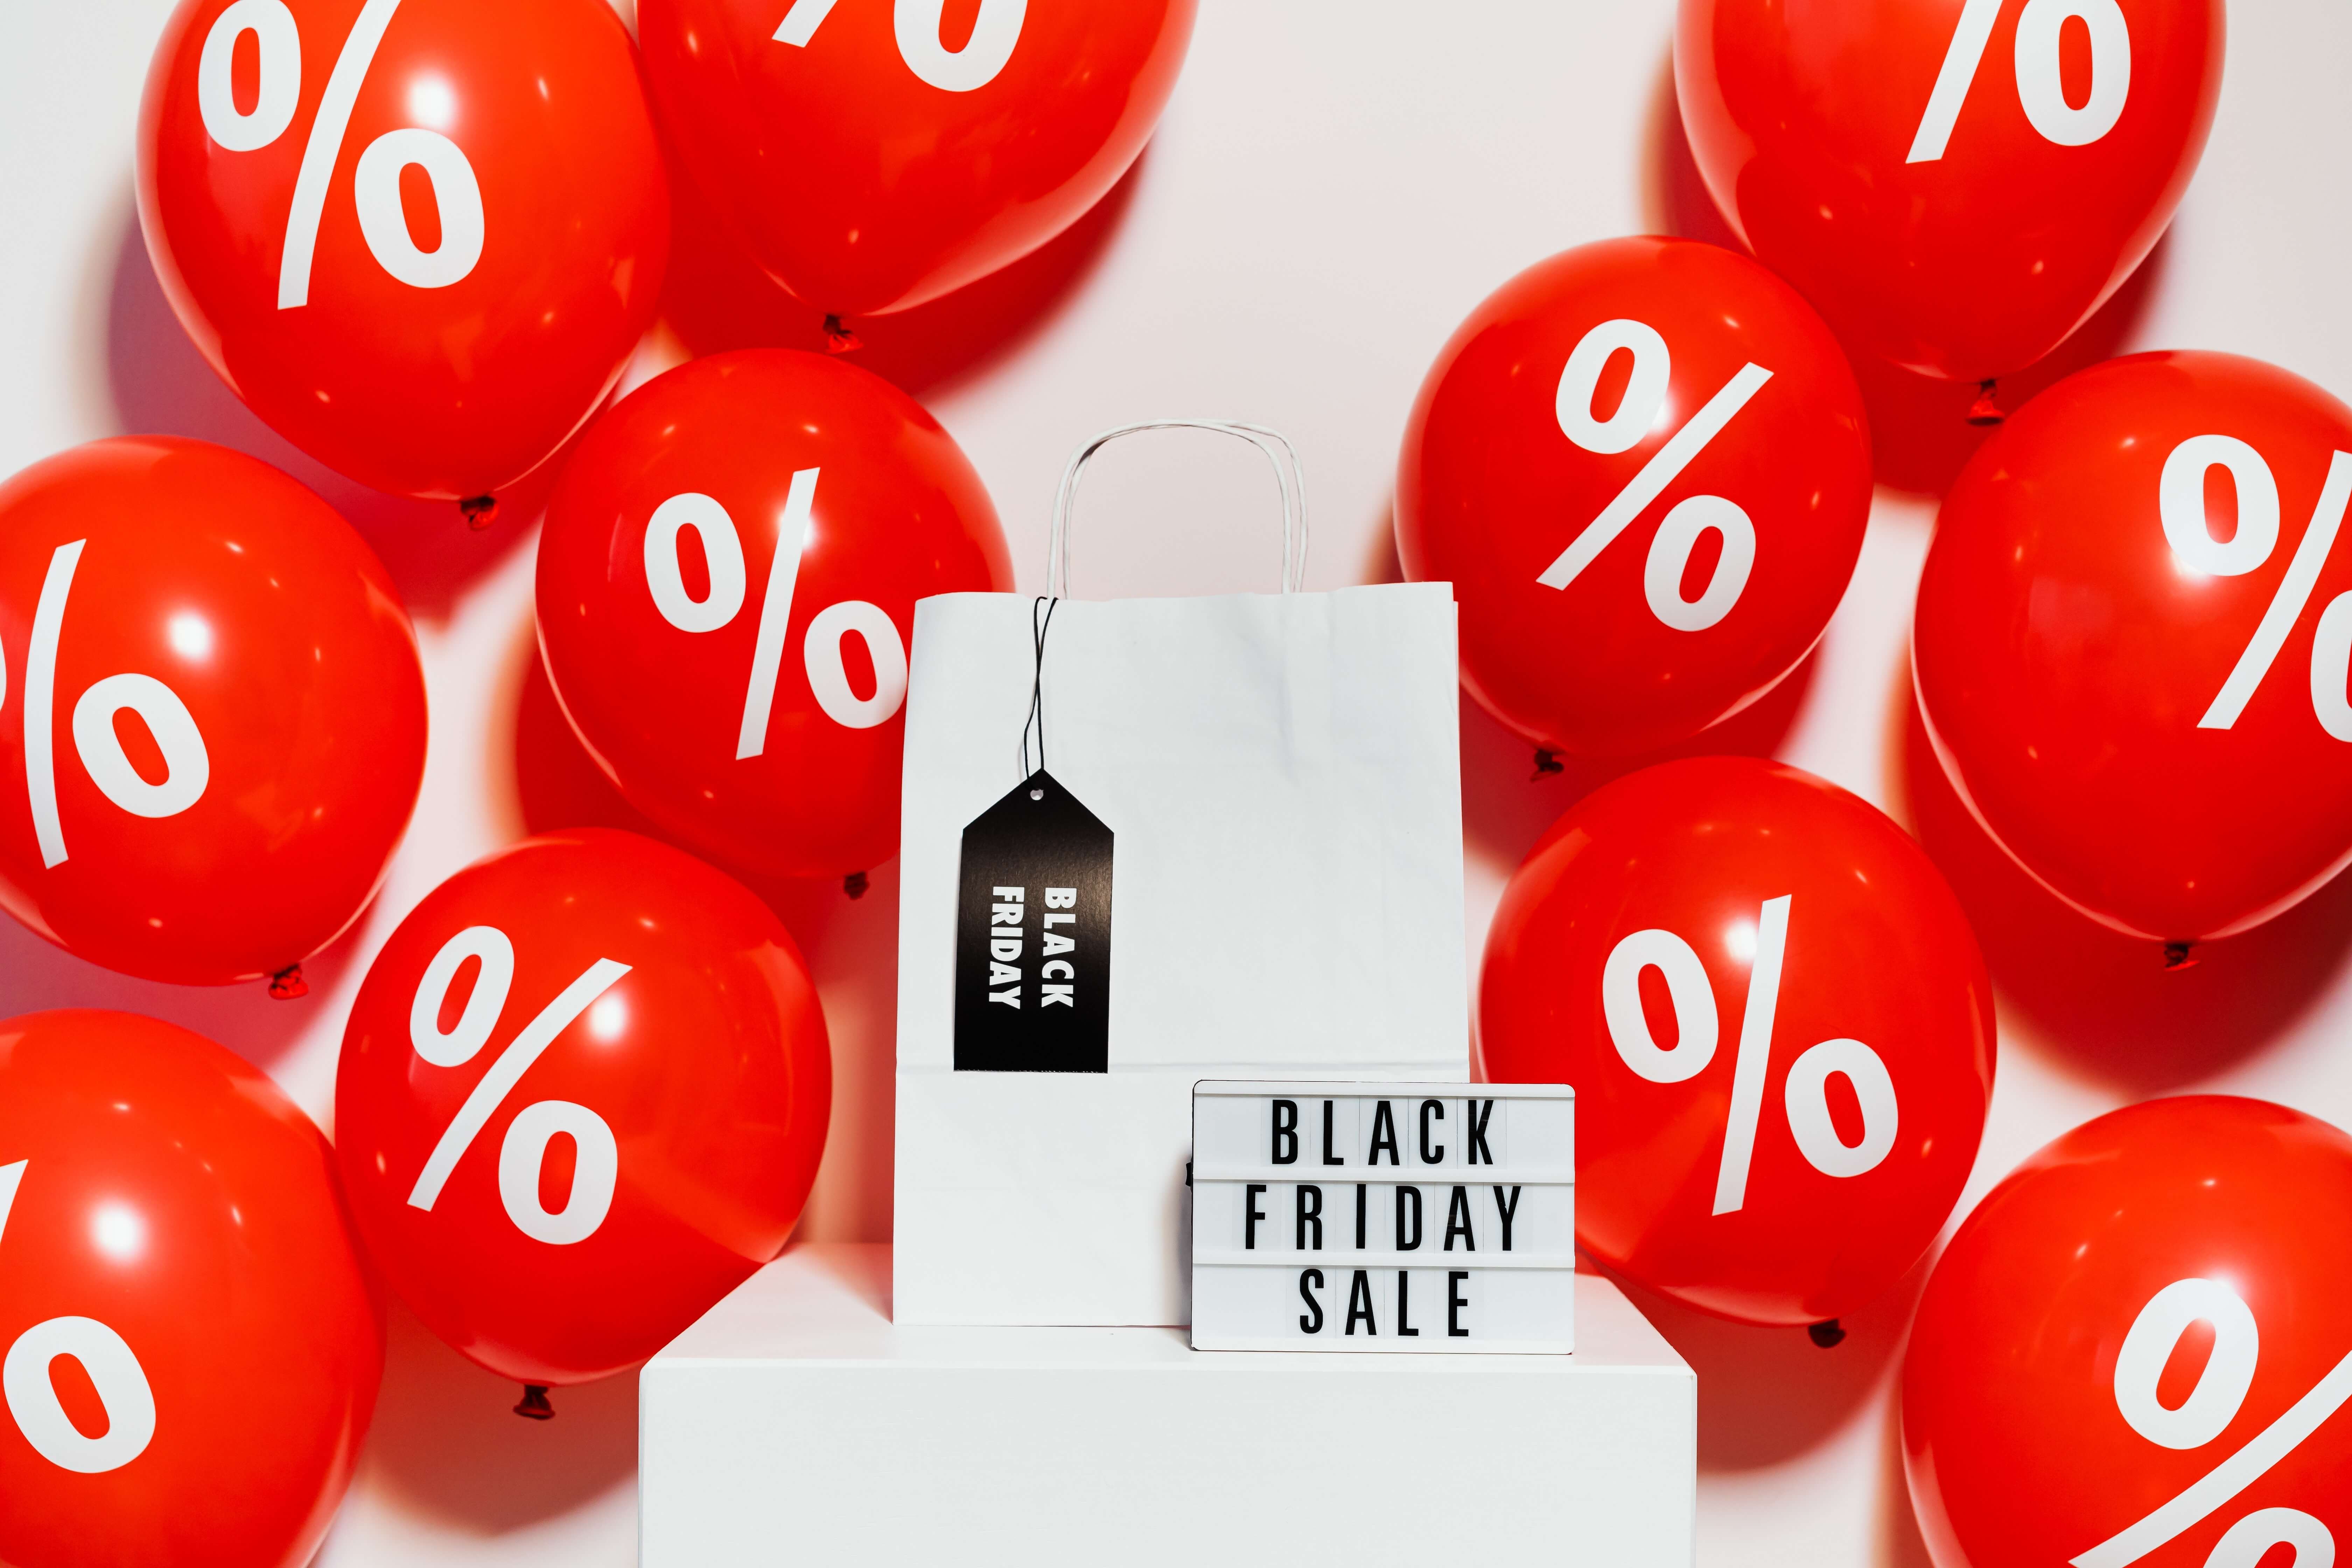 Black Friday Sign Amongst a Group of Red Balloonss